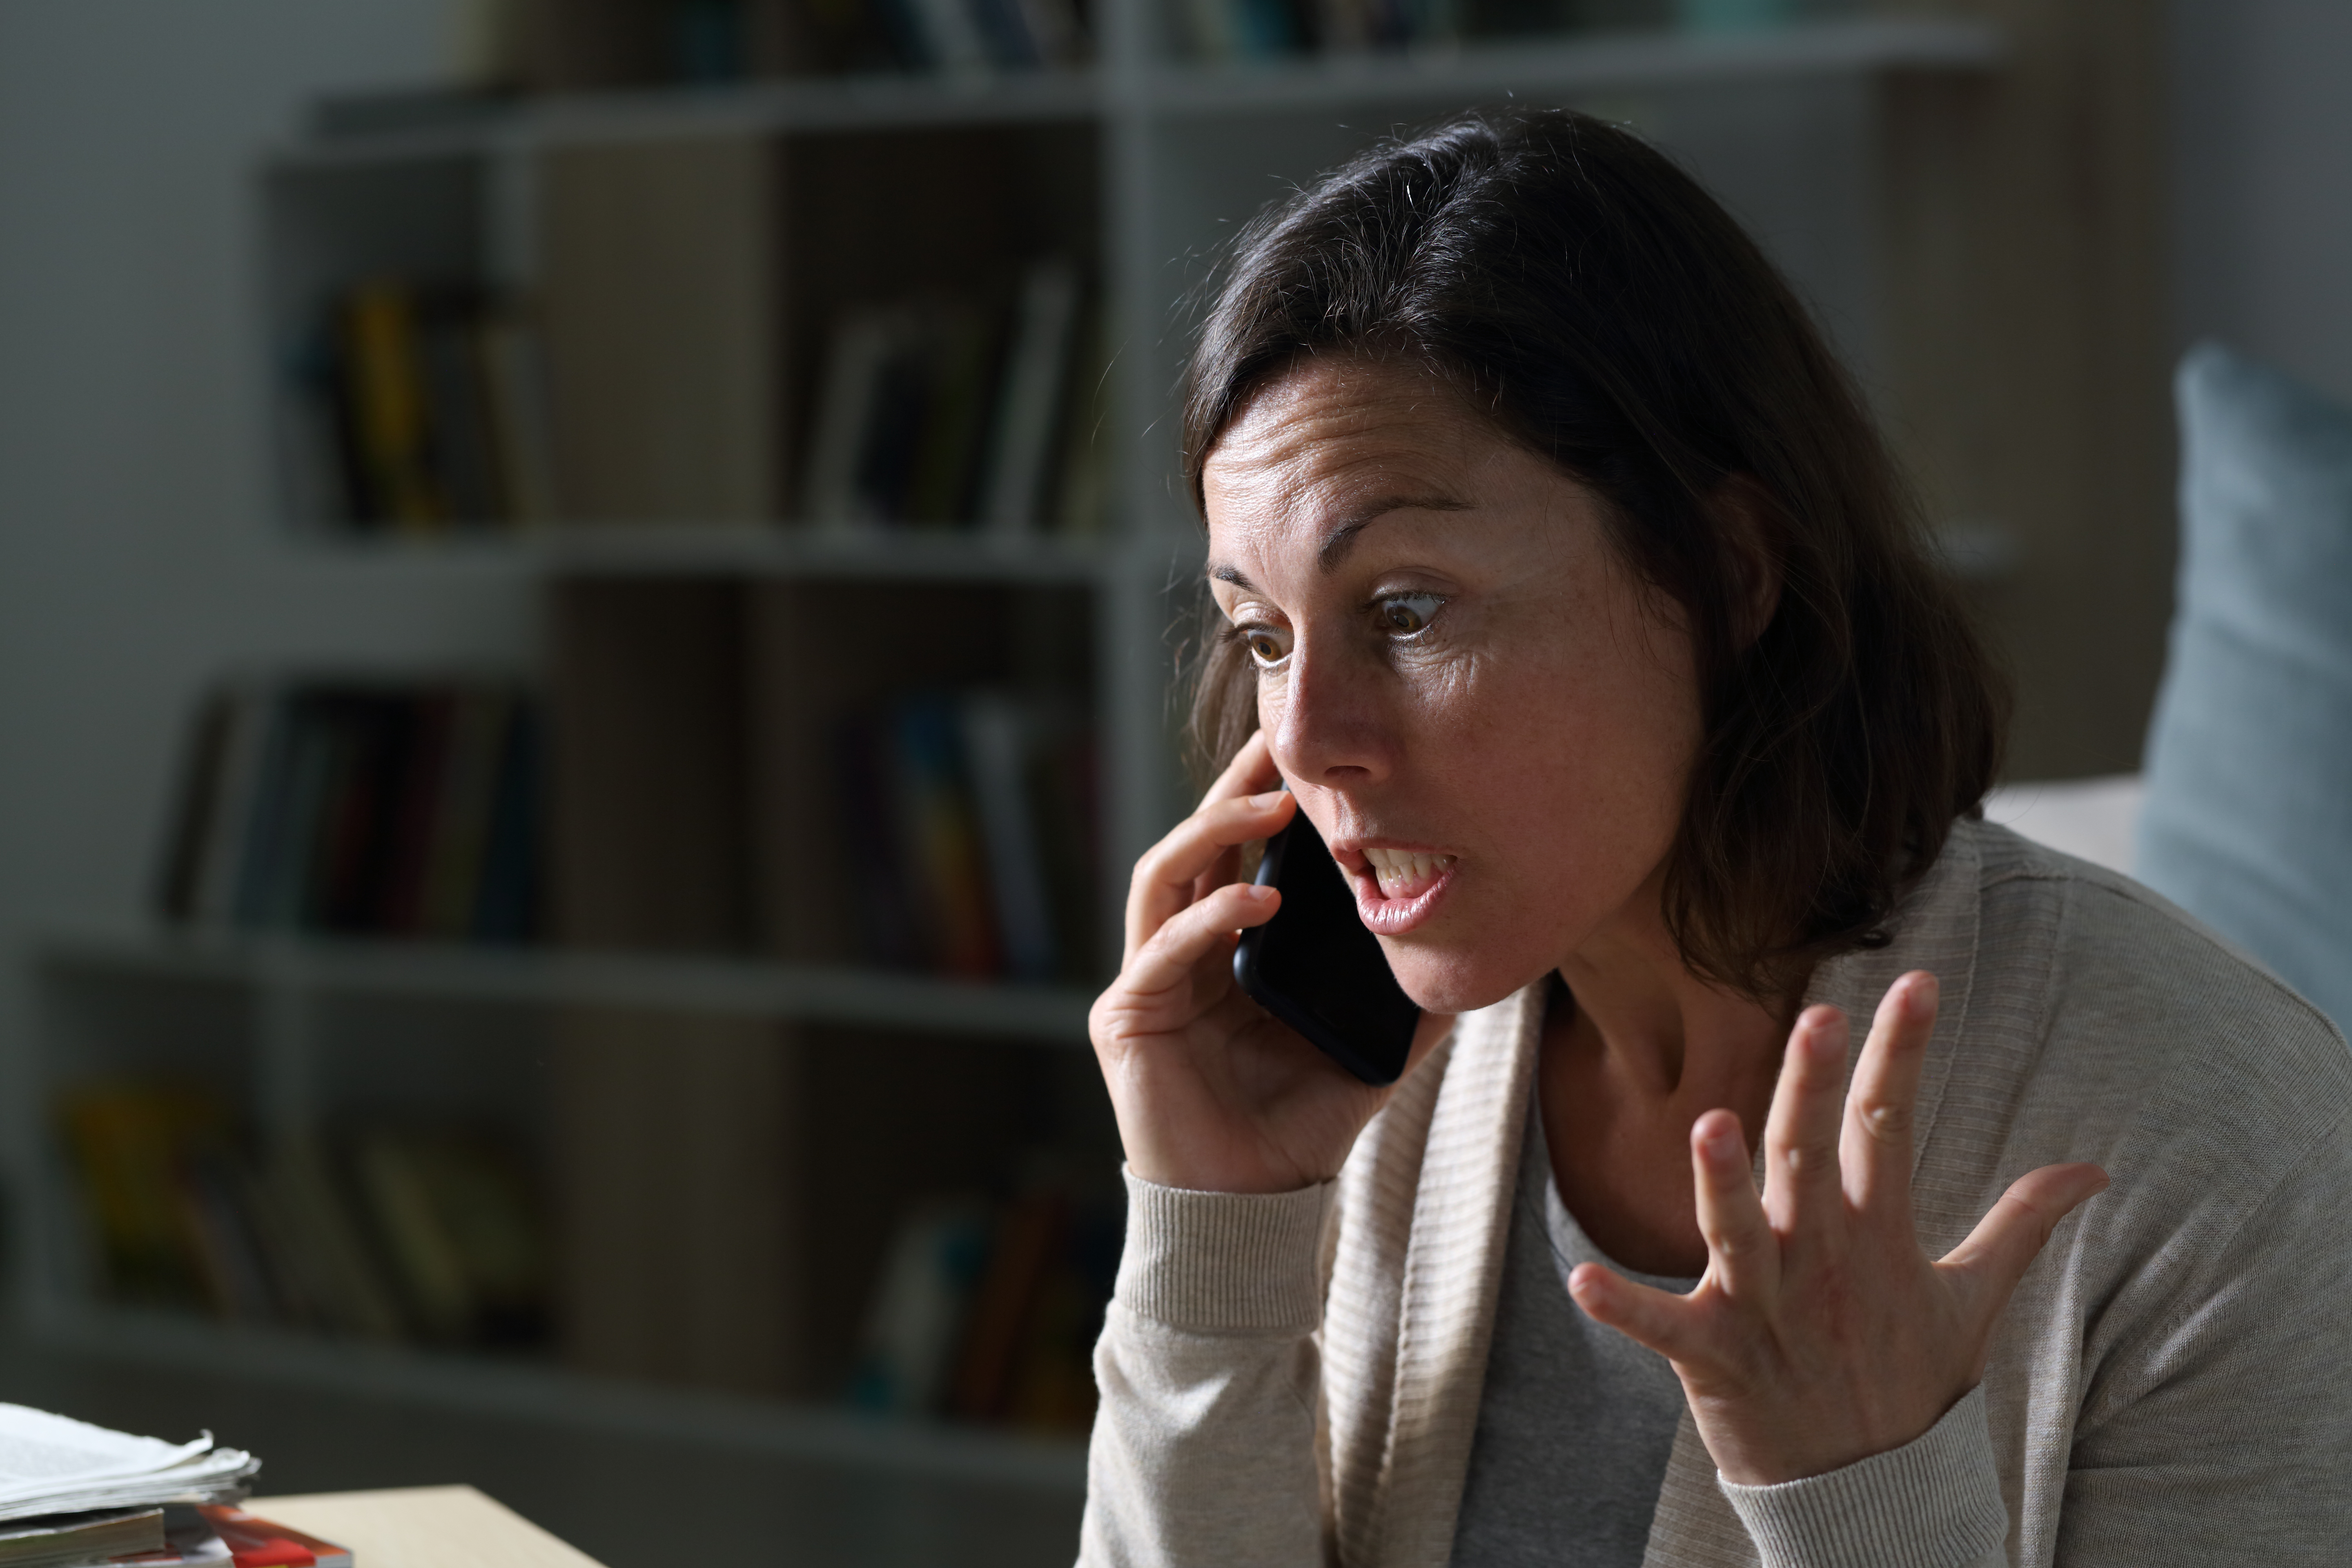 An angry woman on a call | Source: Shutterstock